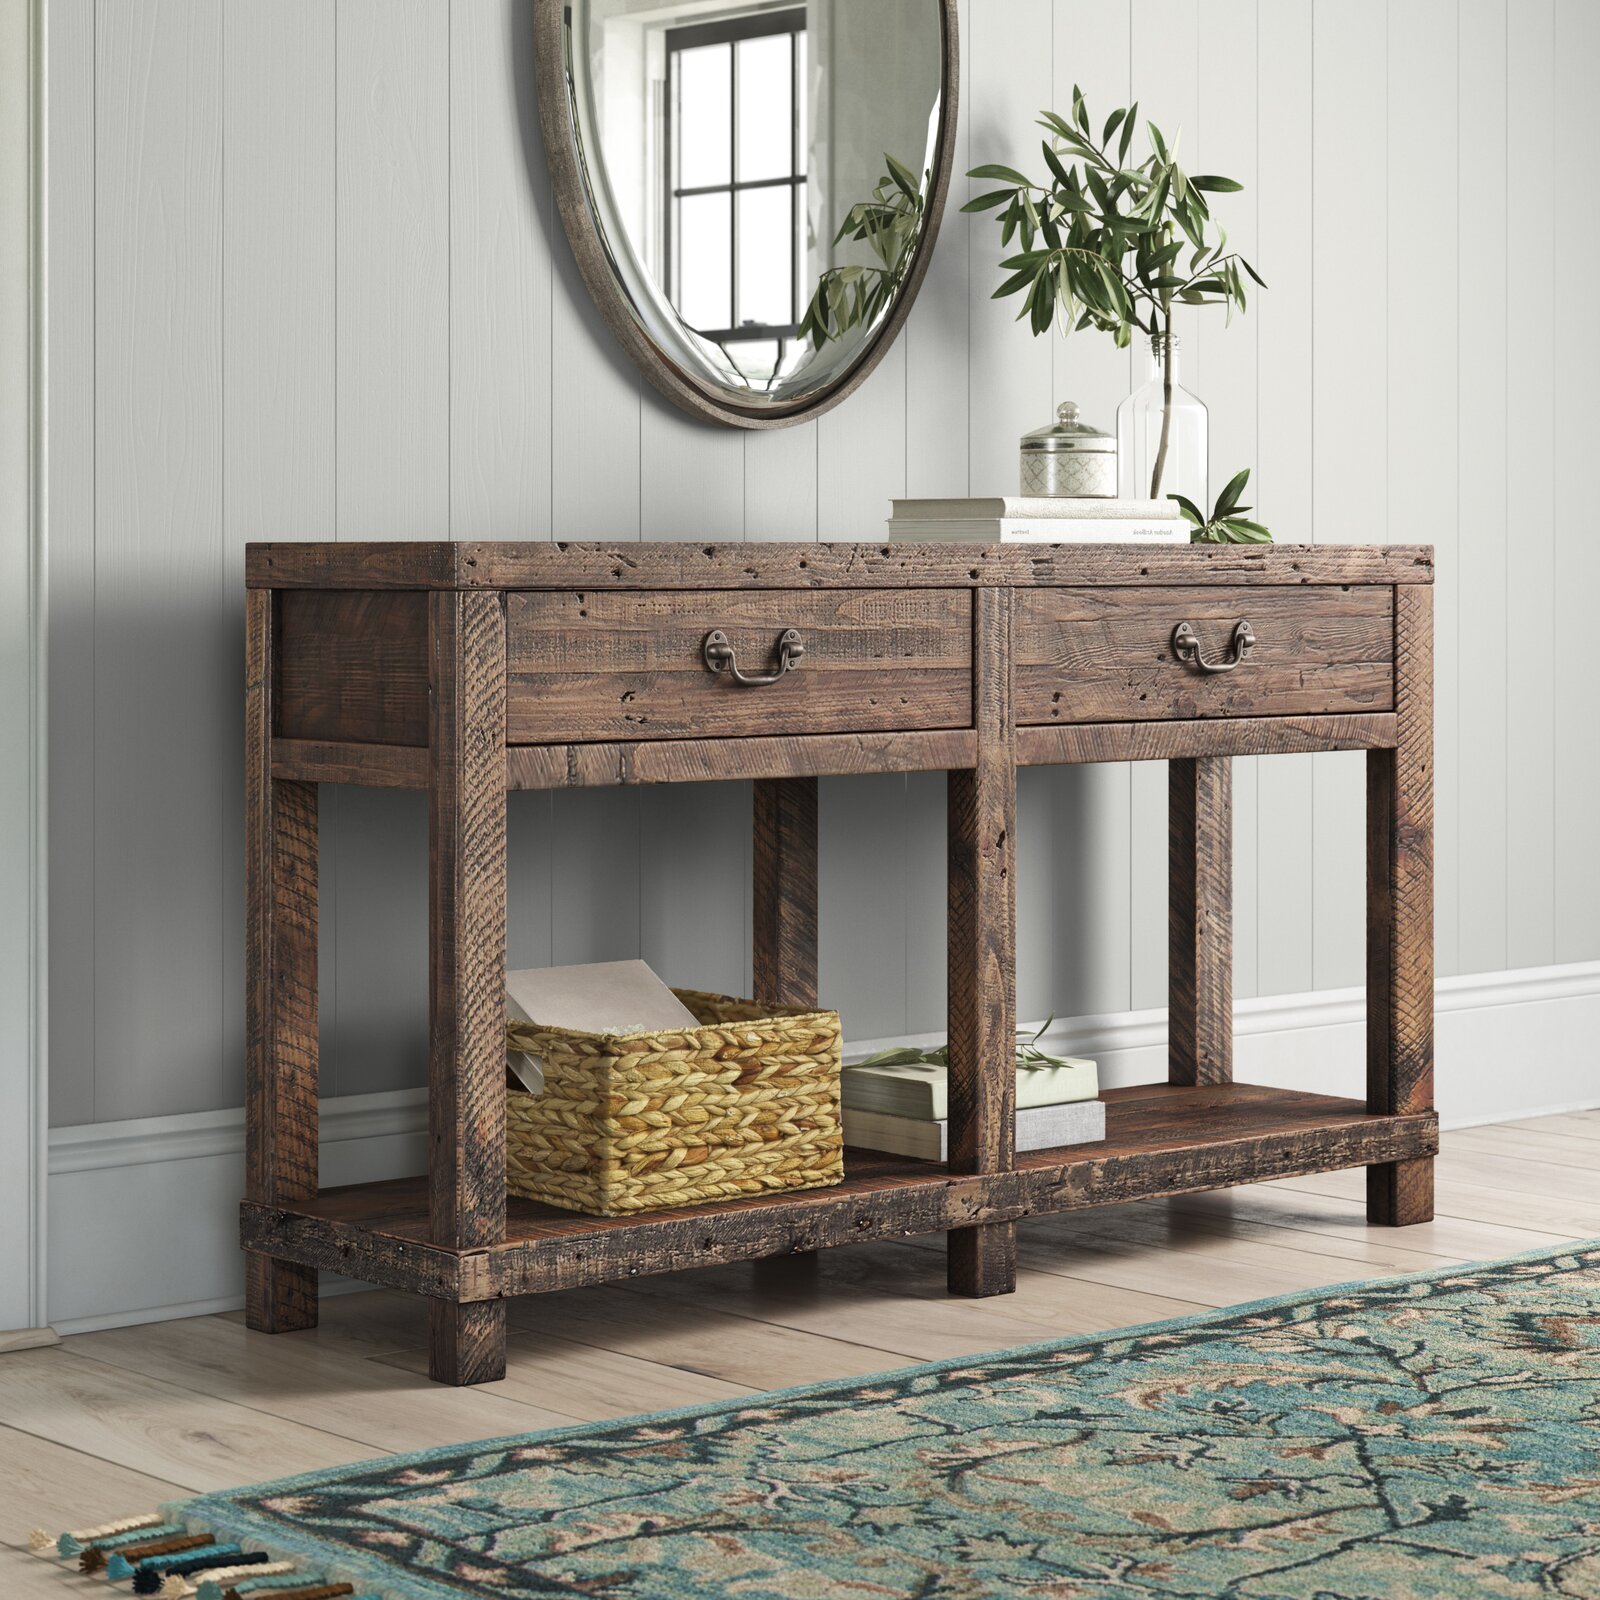 15 Gorgeous Entryway Table Ideas To, Birch Lane Console Table